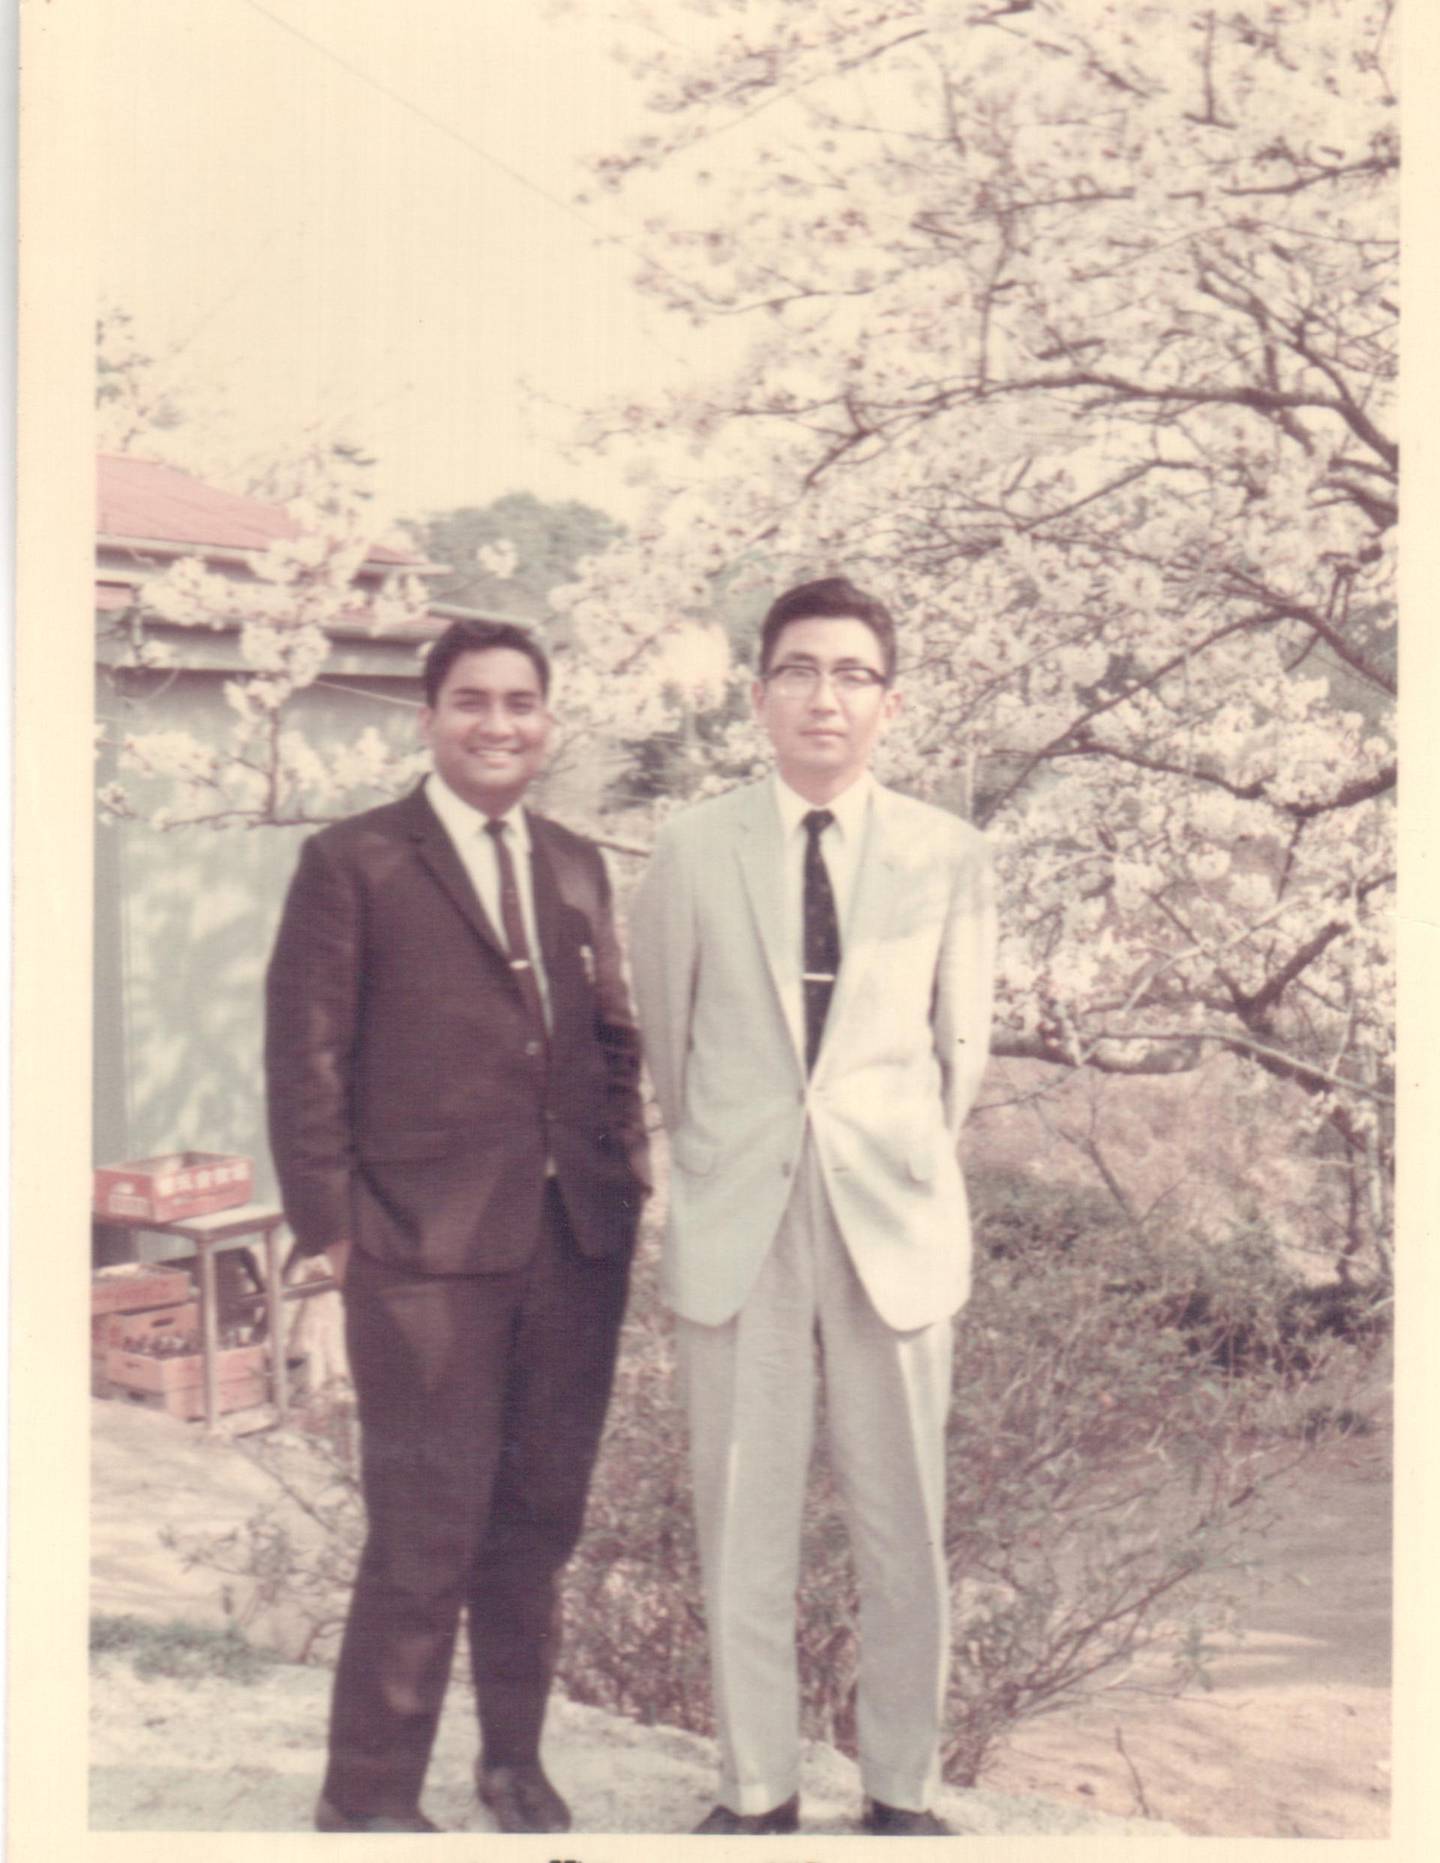 UAE businessman Vasu Shroff sought to grow the garment business across the world. He is seen with a supplier in Japan in 1971. Courtesy: Shroff family